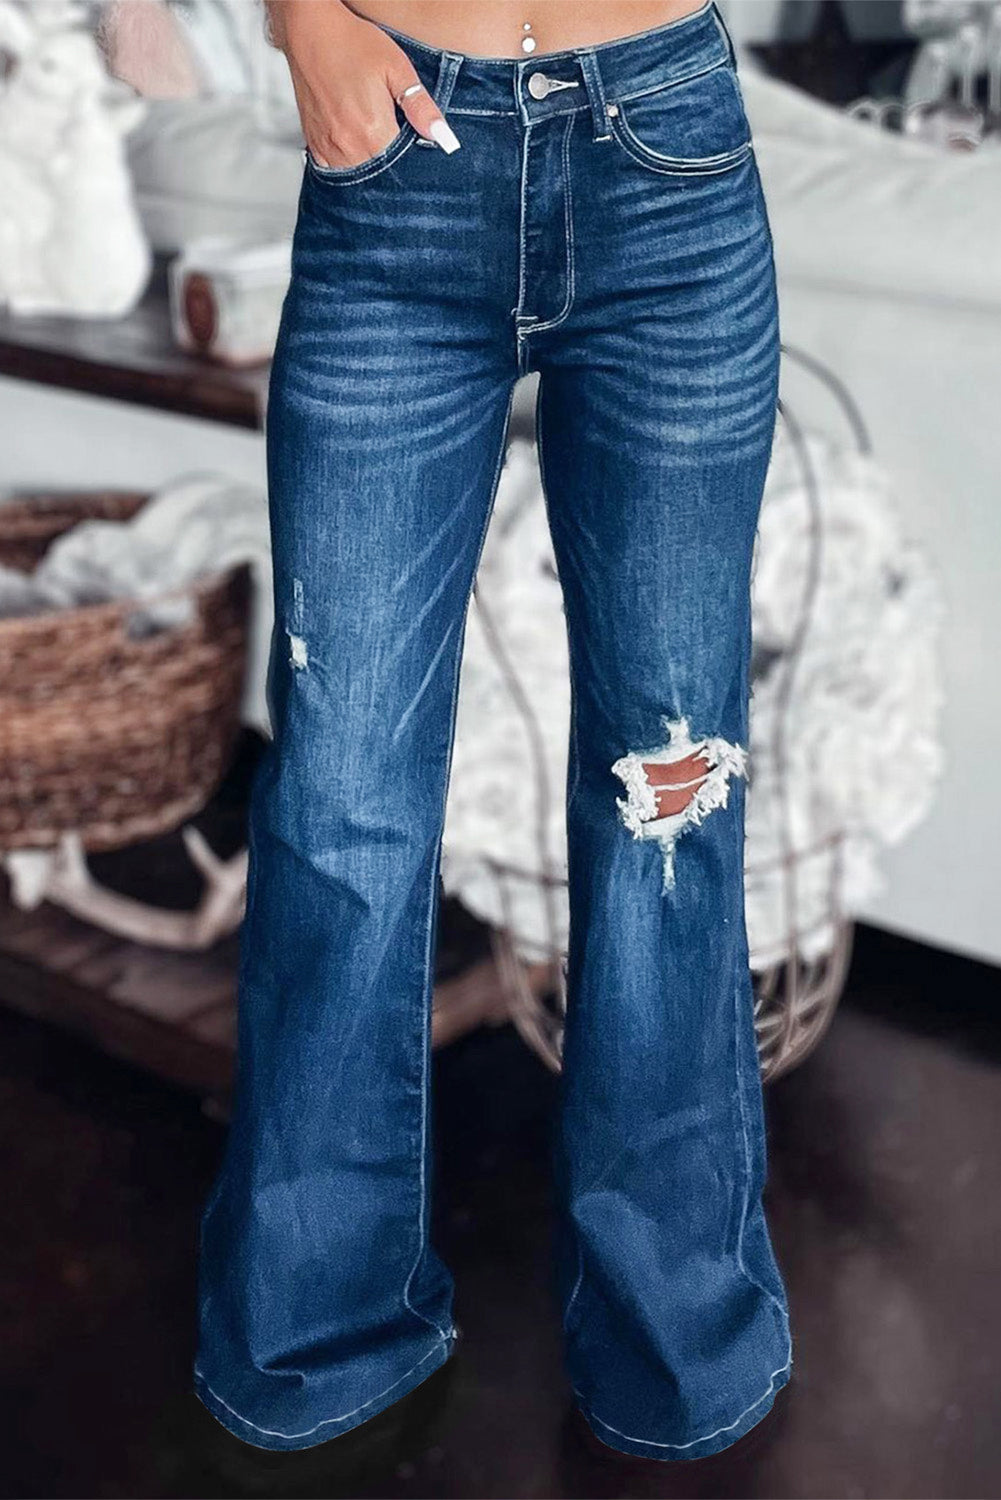 Women's Flare Ripped & Distressed Jeans